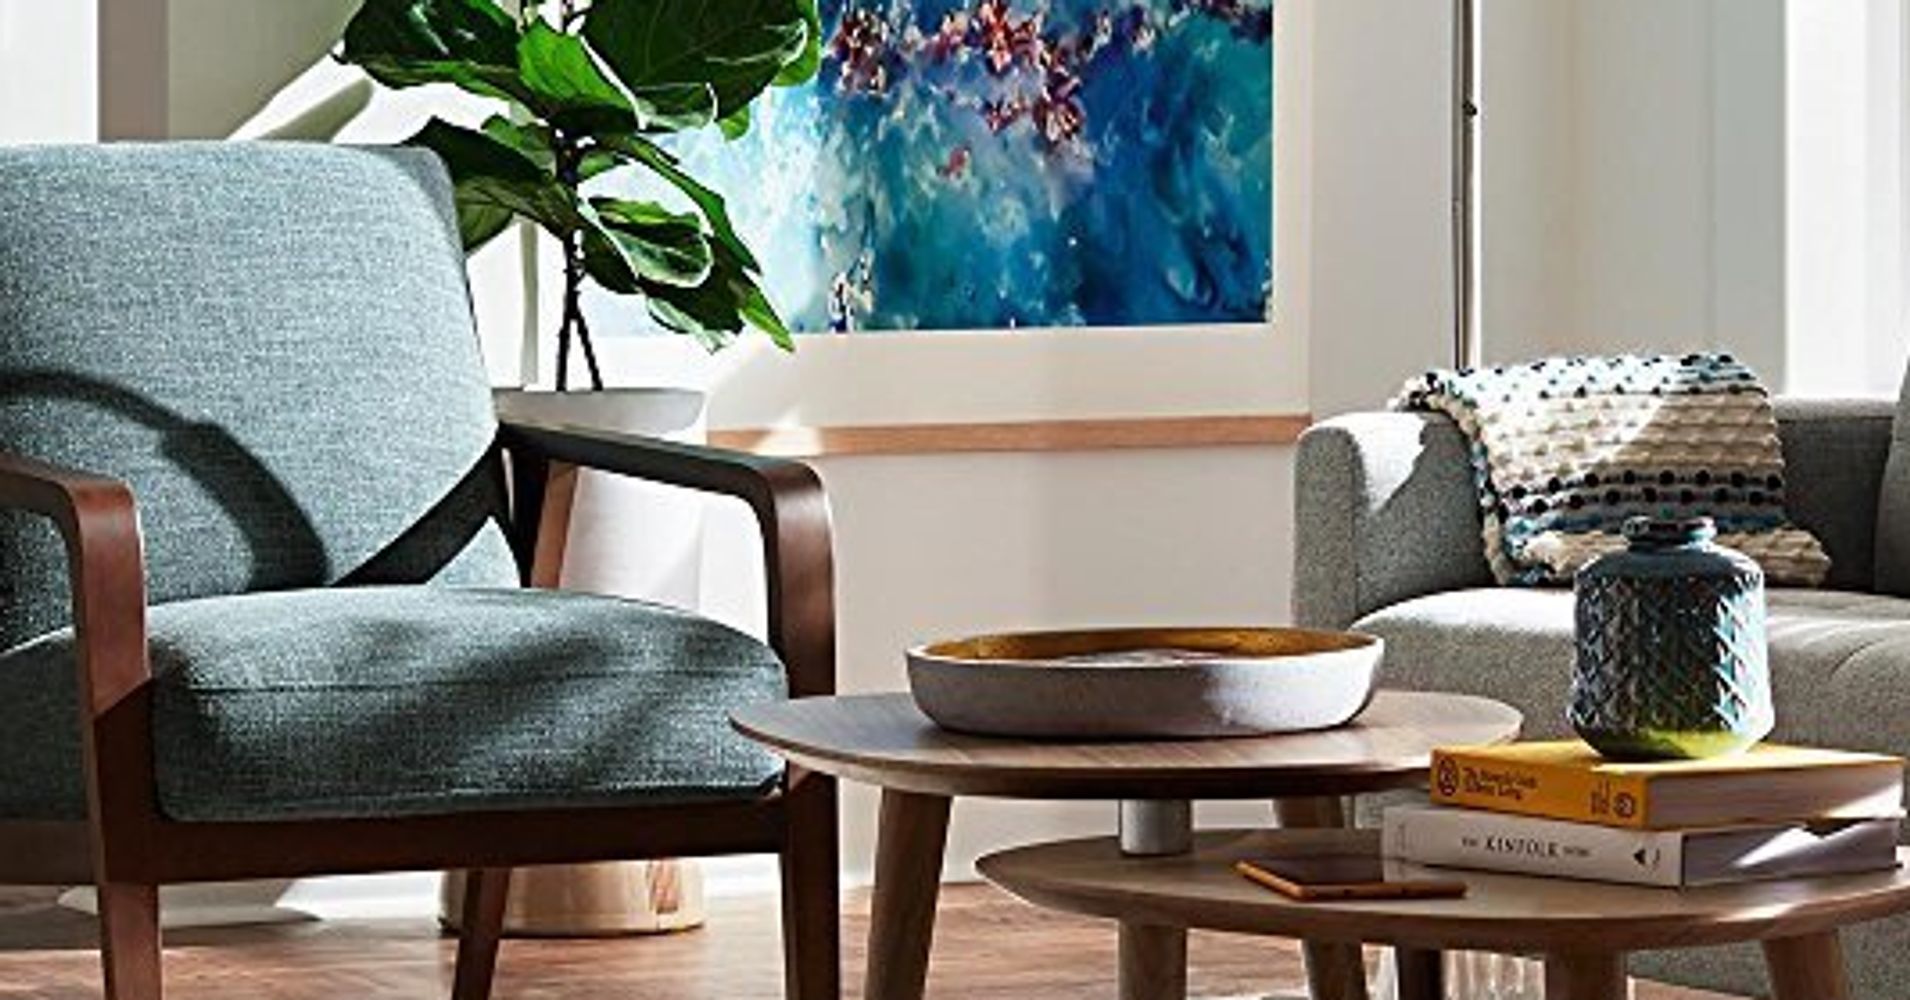 Furniture And Home Decor Deals To Shop This Amazon Prime ...